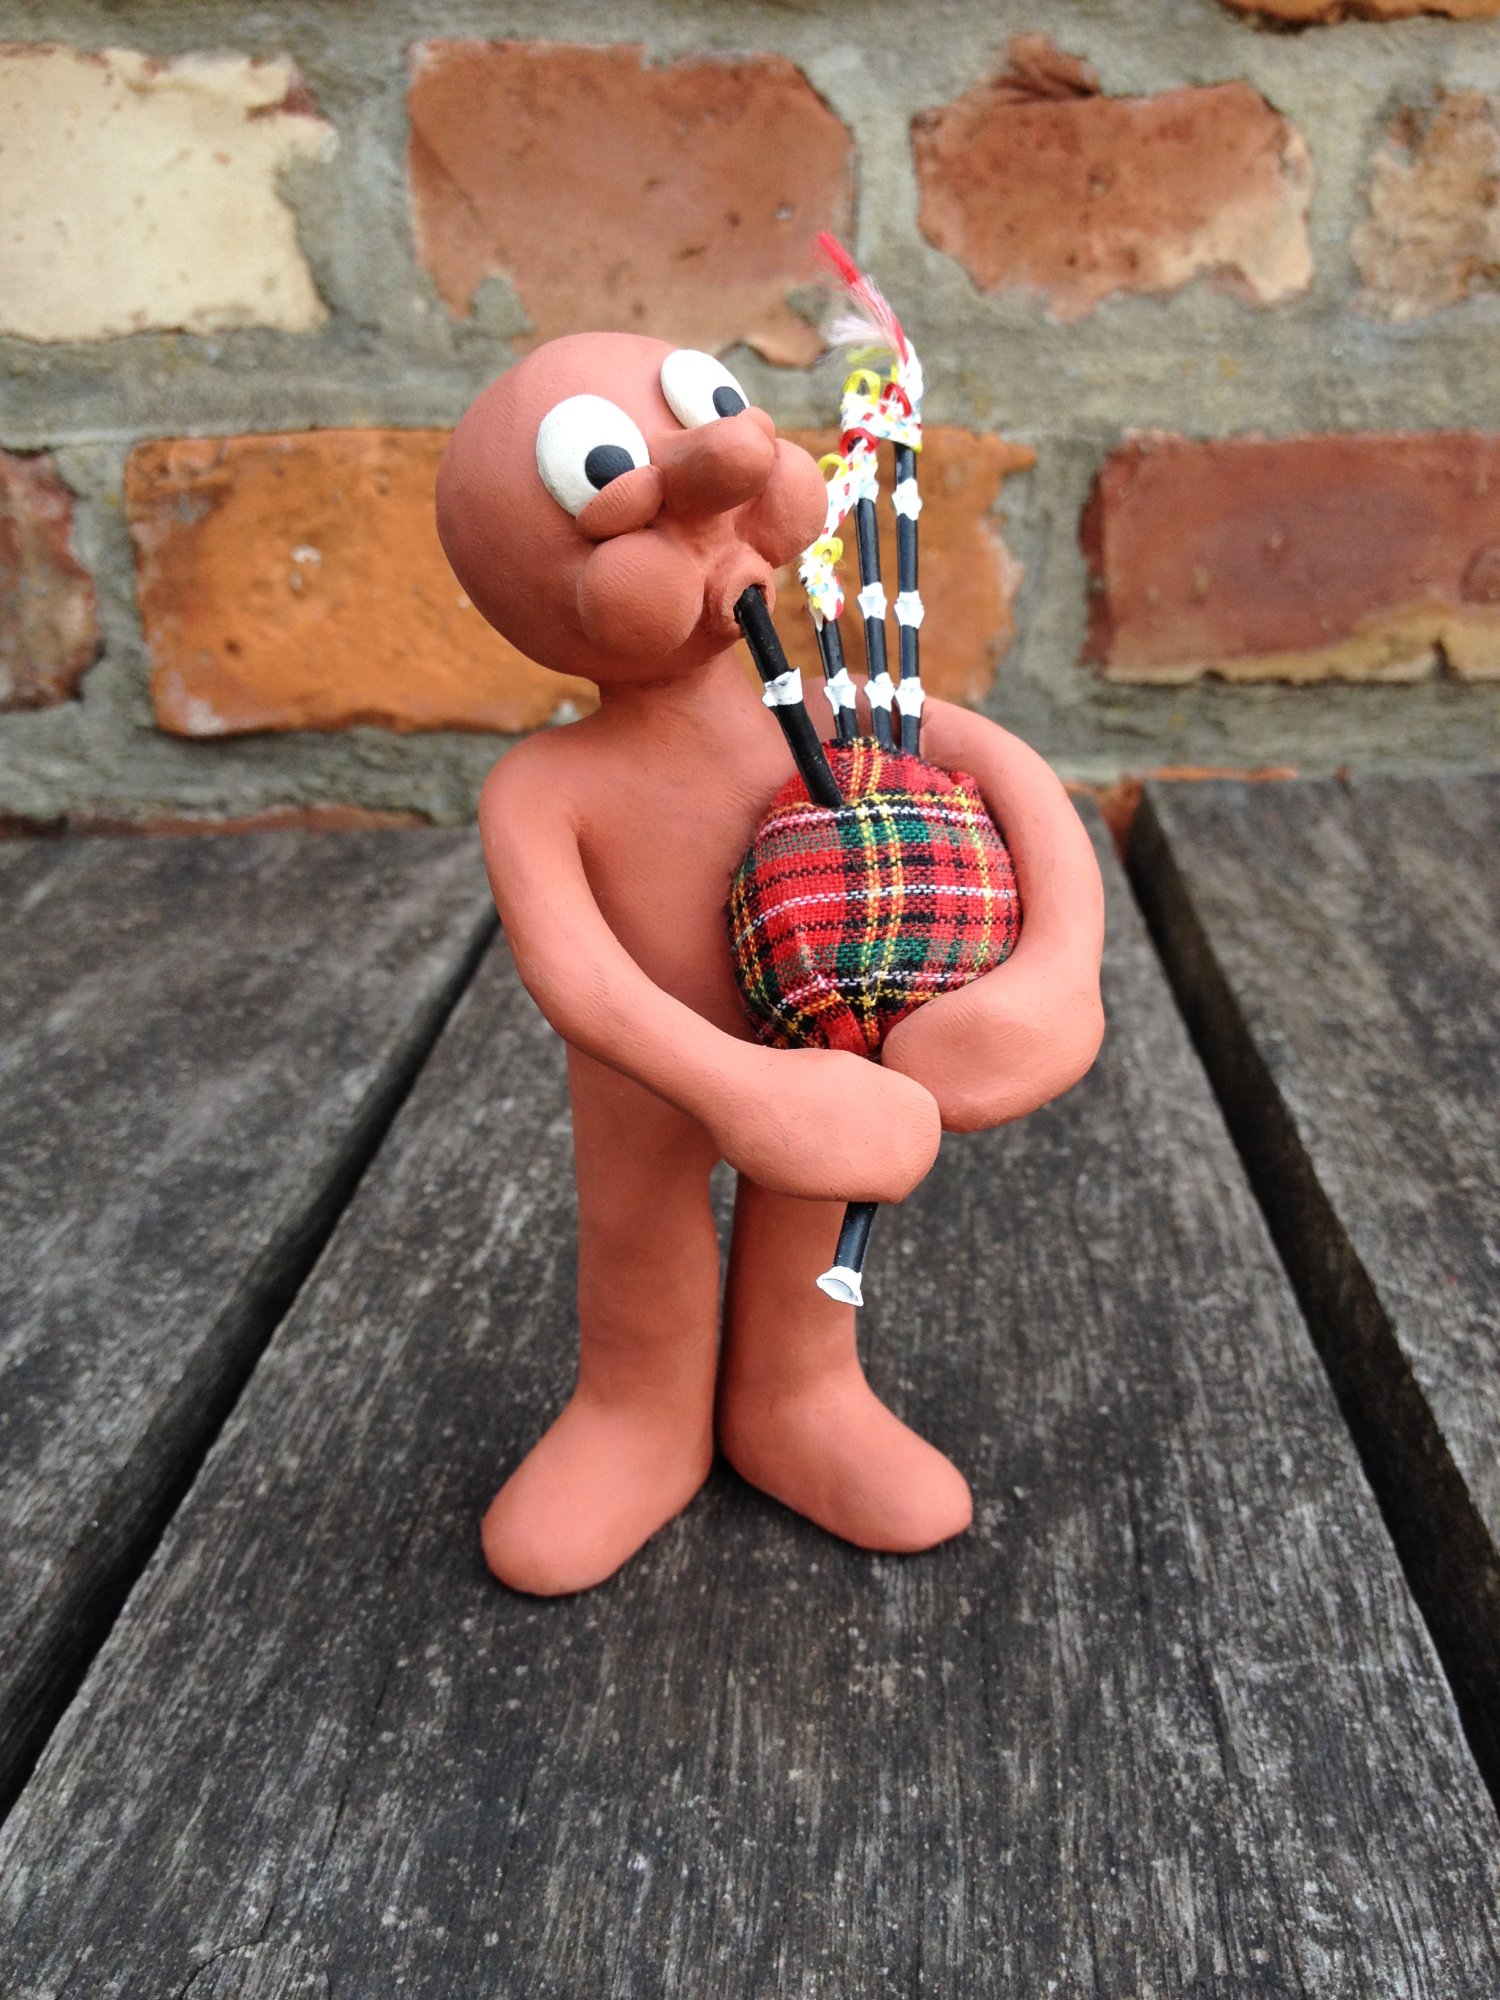 Morph playing the bagpipes